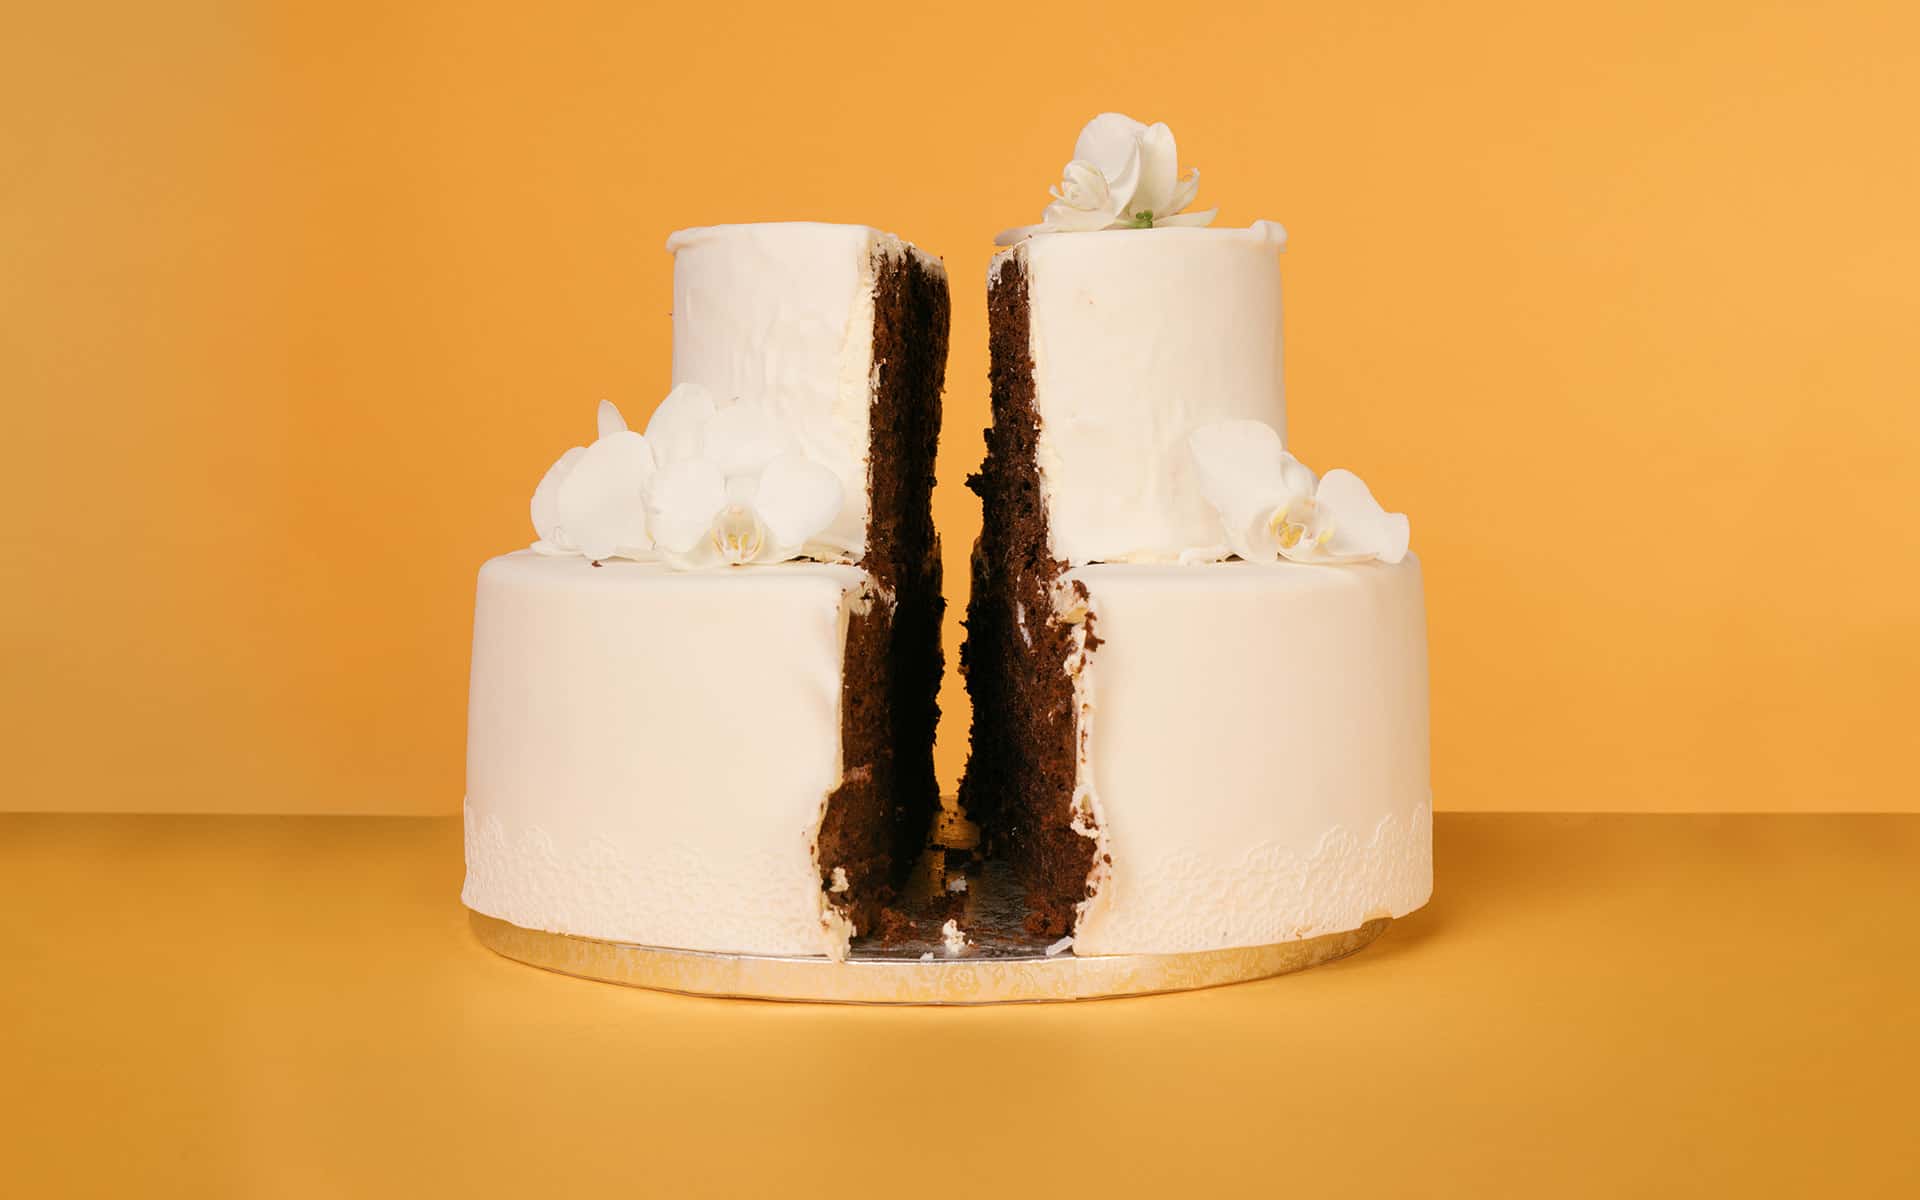 Separated wedding cake, a sign of trouble